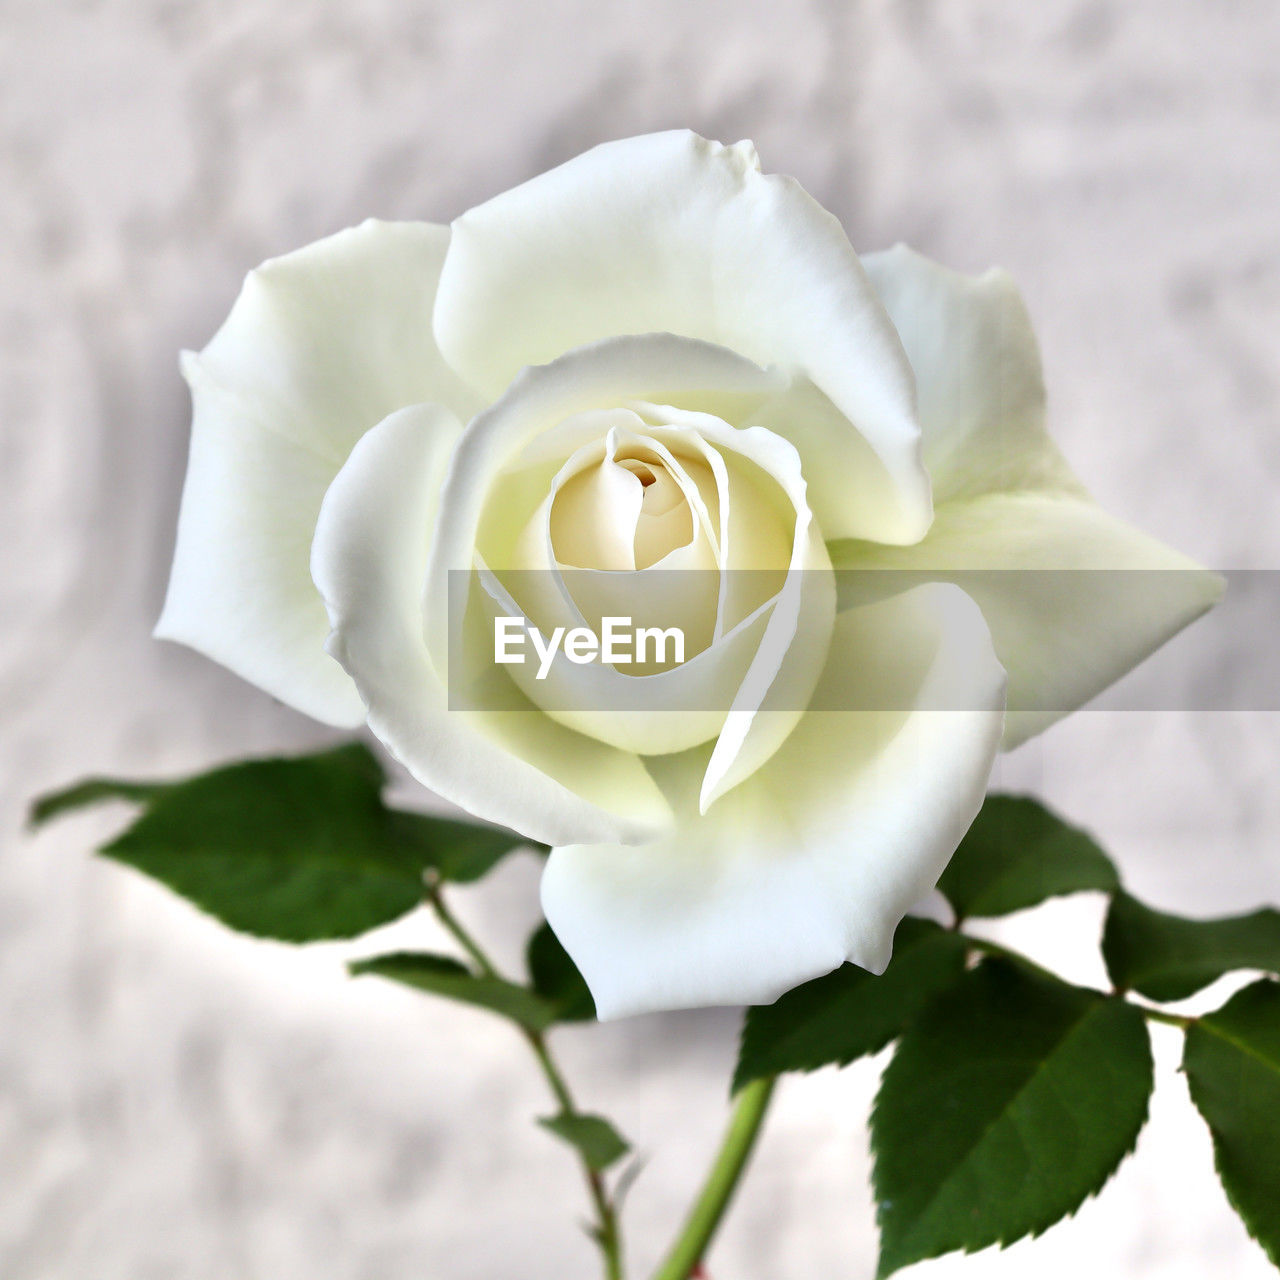 flower, flowering plant, plant, beauty in nature, rose, freshness, white, leaf, nature, plant part, petal, flower head, inflorescence, close-up, garden roses, fragility, gardenia, no people, yellow, bouquet, cut flowers, outdoors, springtime, macro photography, focus on foreground, blossom, emotion, positive emotion